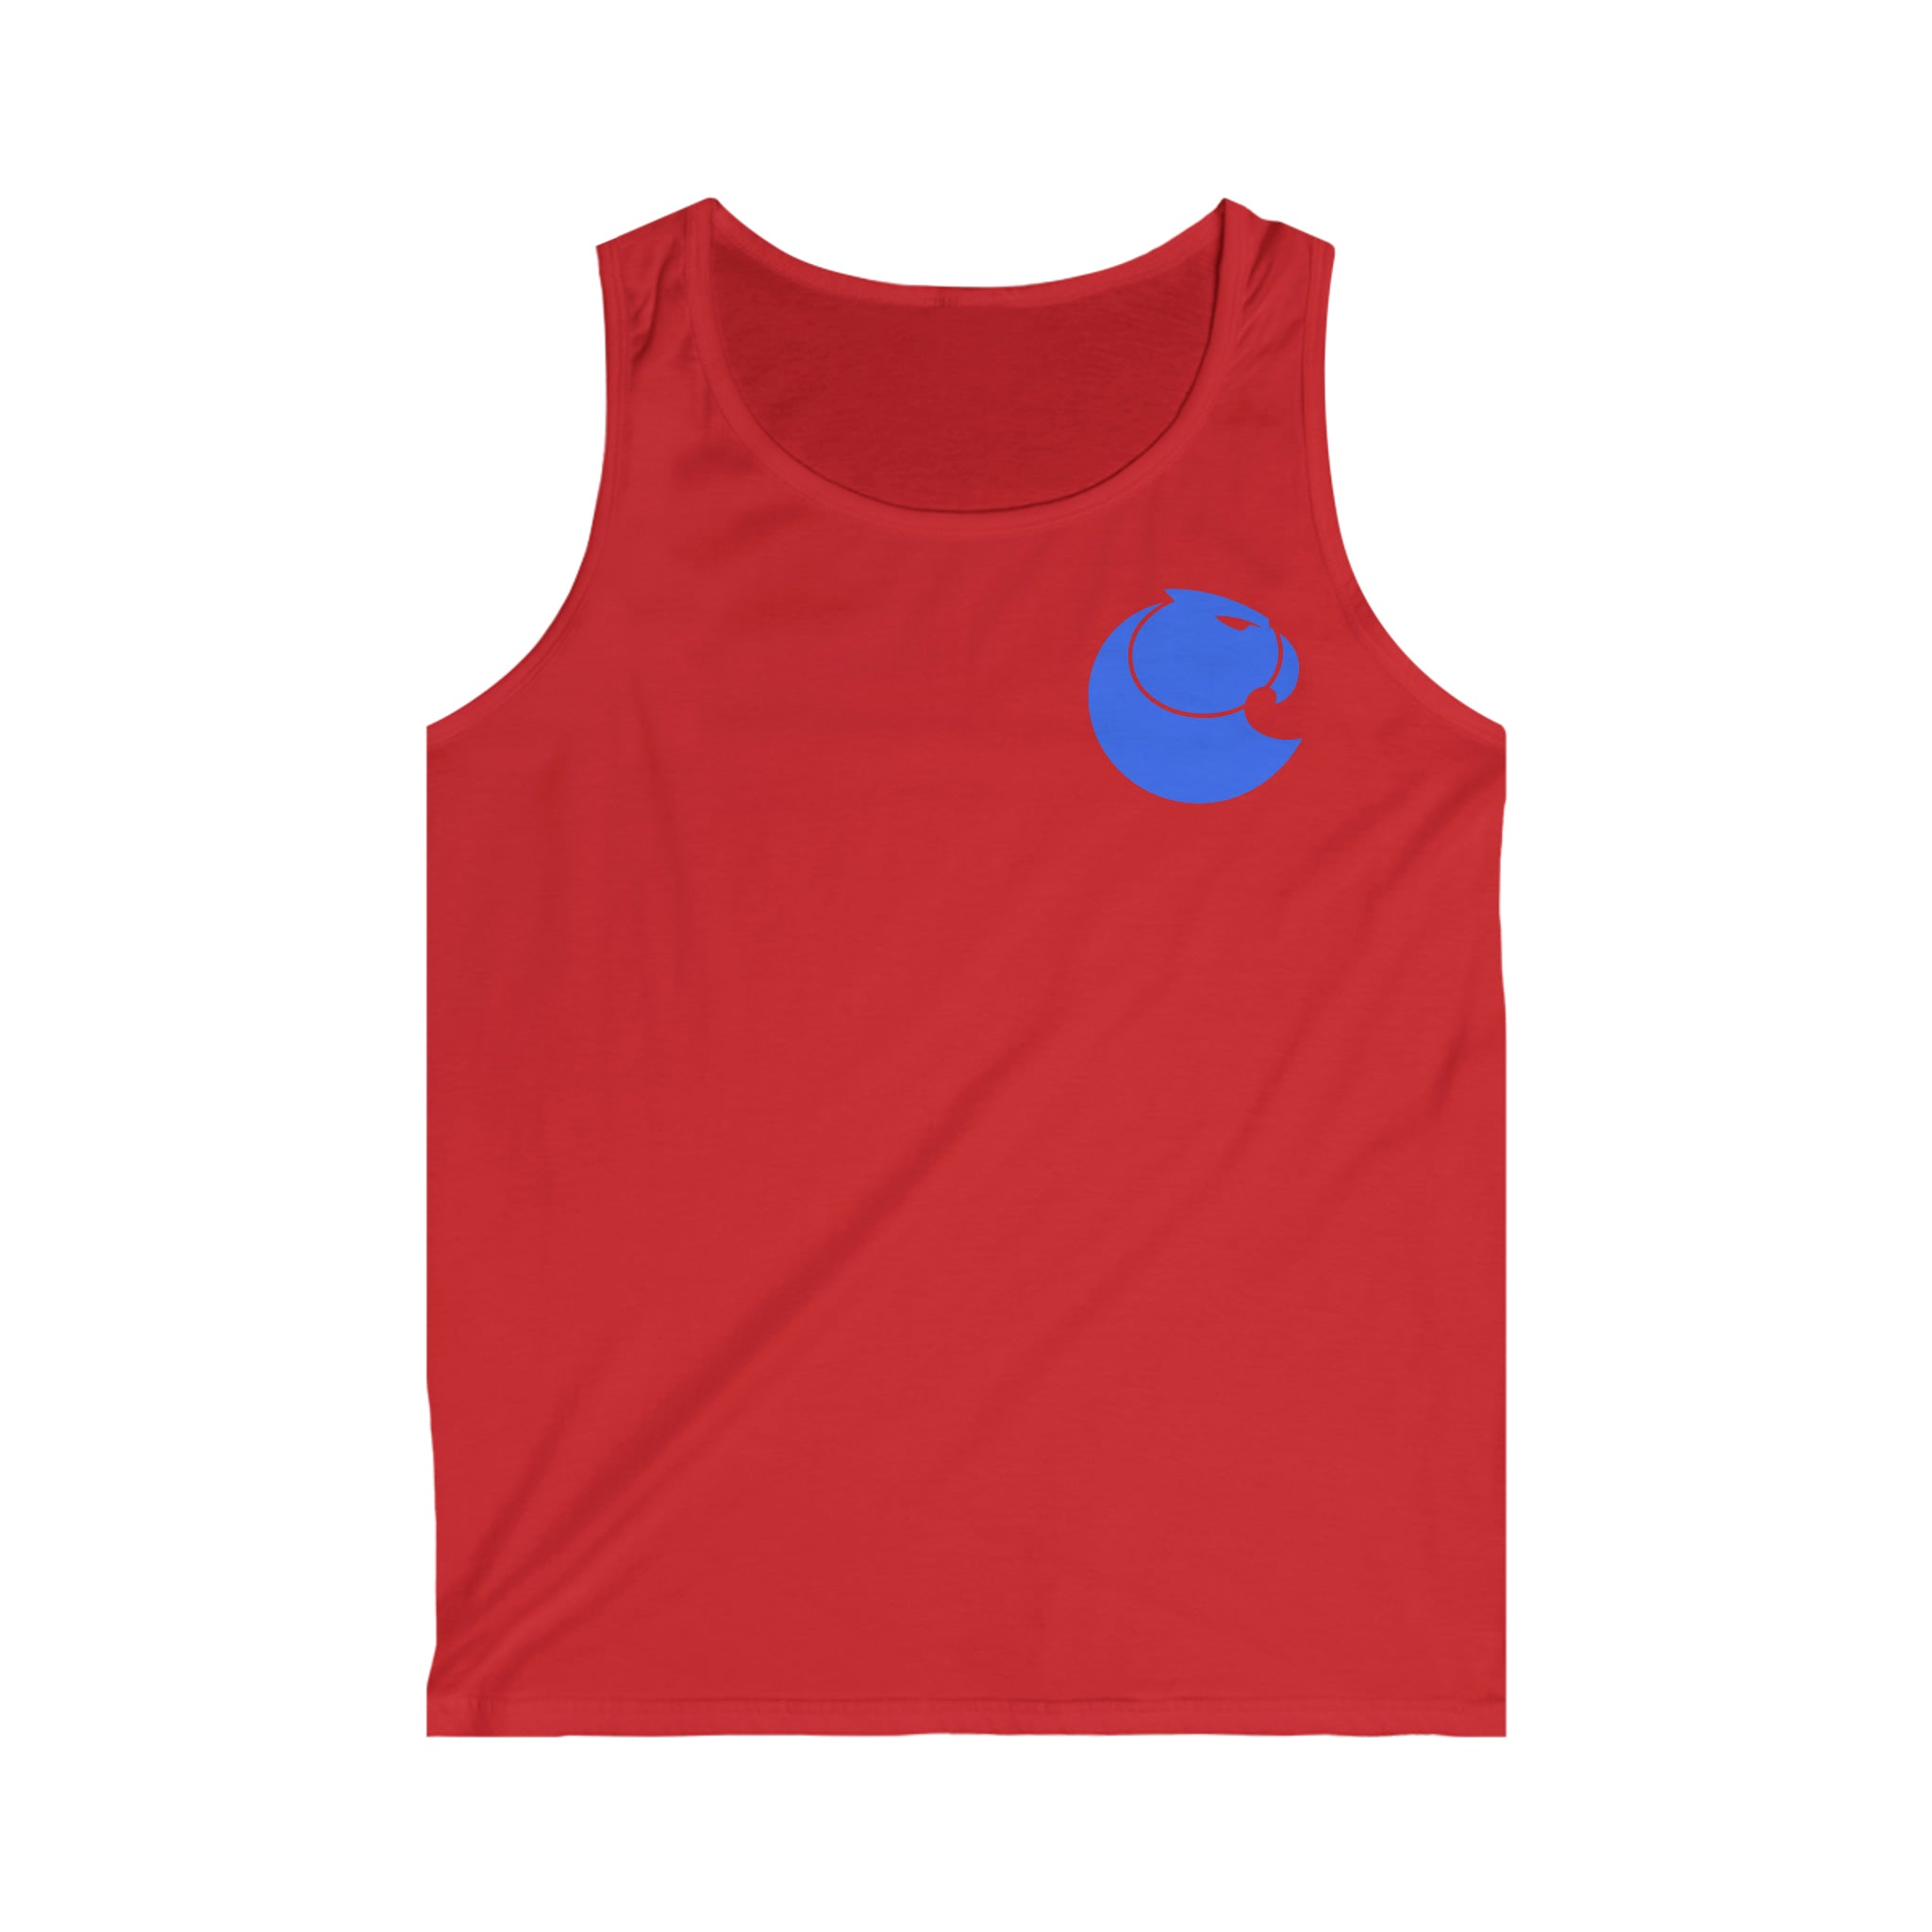 Men's Softstyle Tank Top - ANT - Aragon